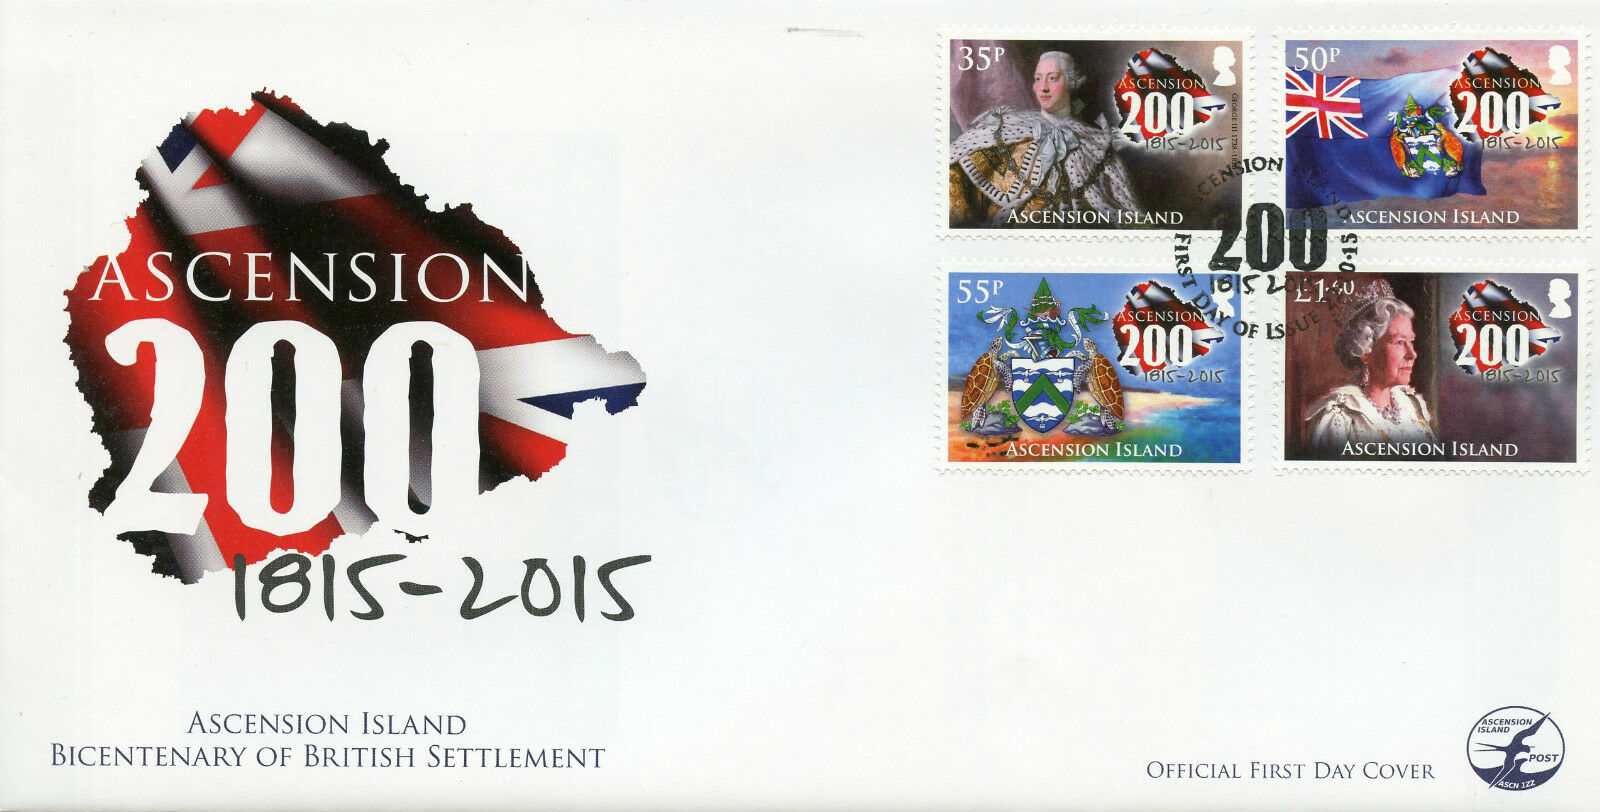 Ascension Is 2015 FDC 200 Bicent British Settlement 4v Cover George III Stamps